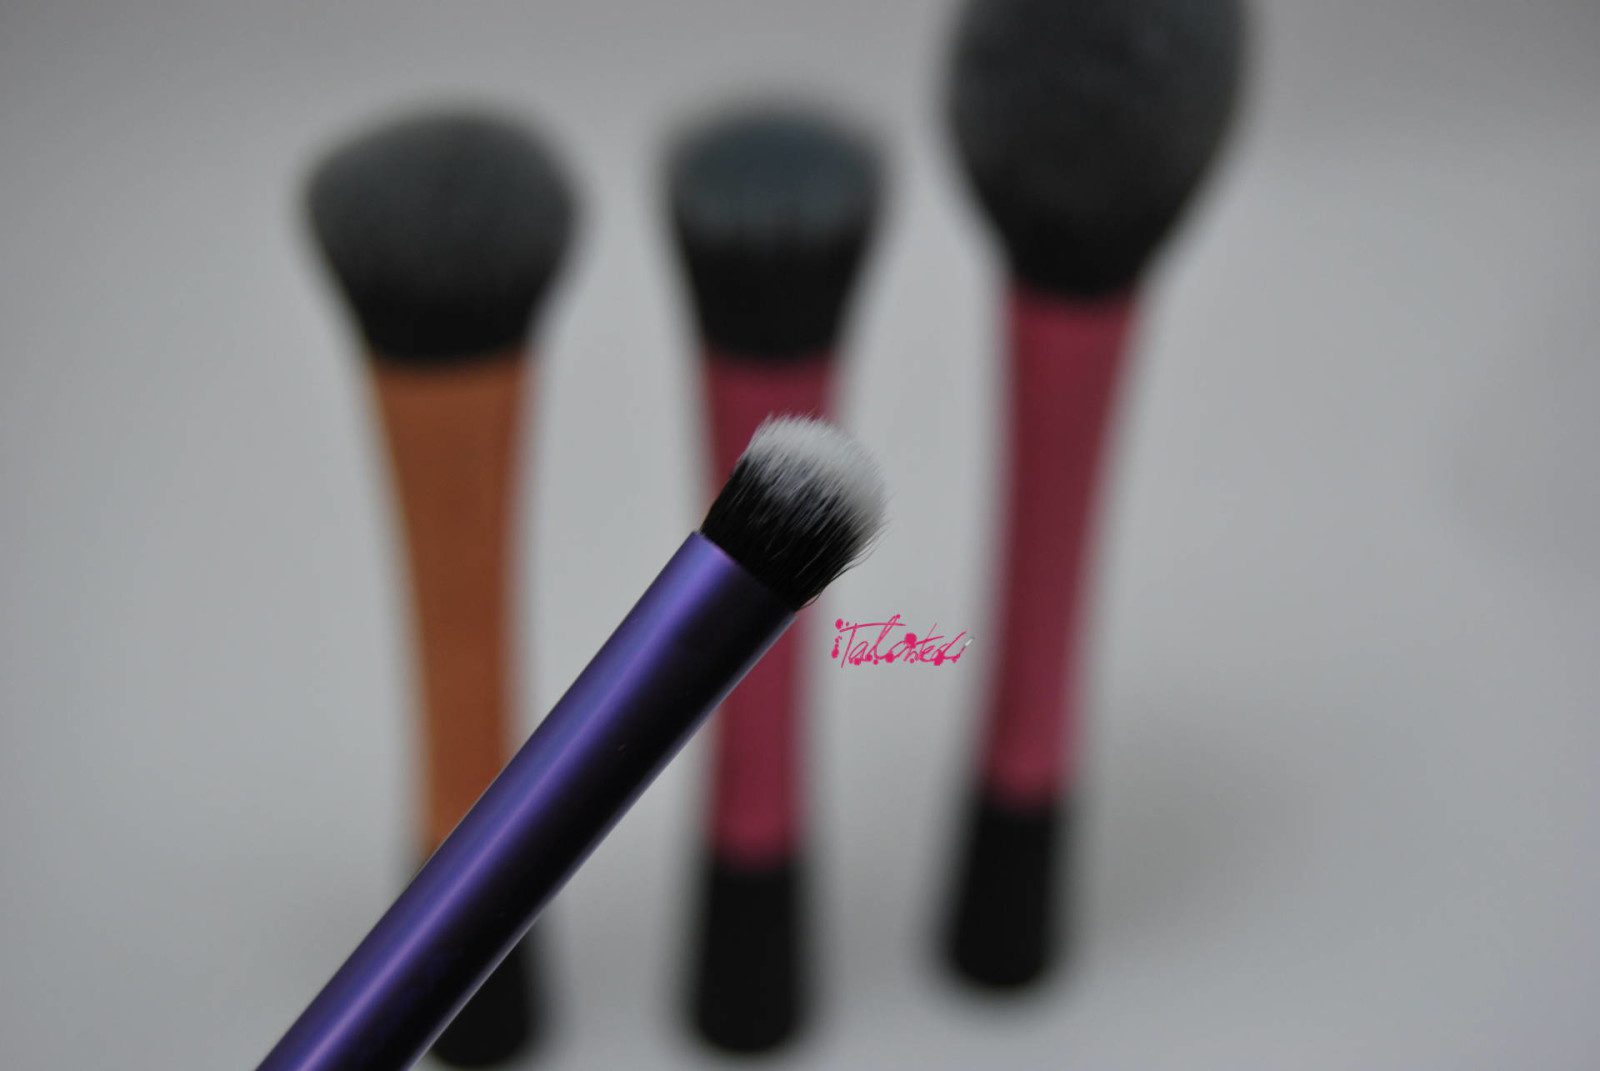 Real Techniques Brushes Mini Review